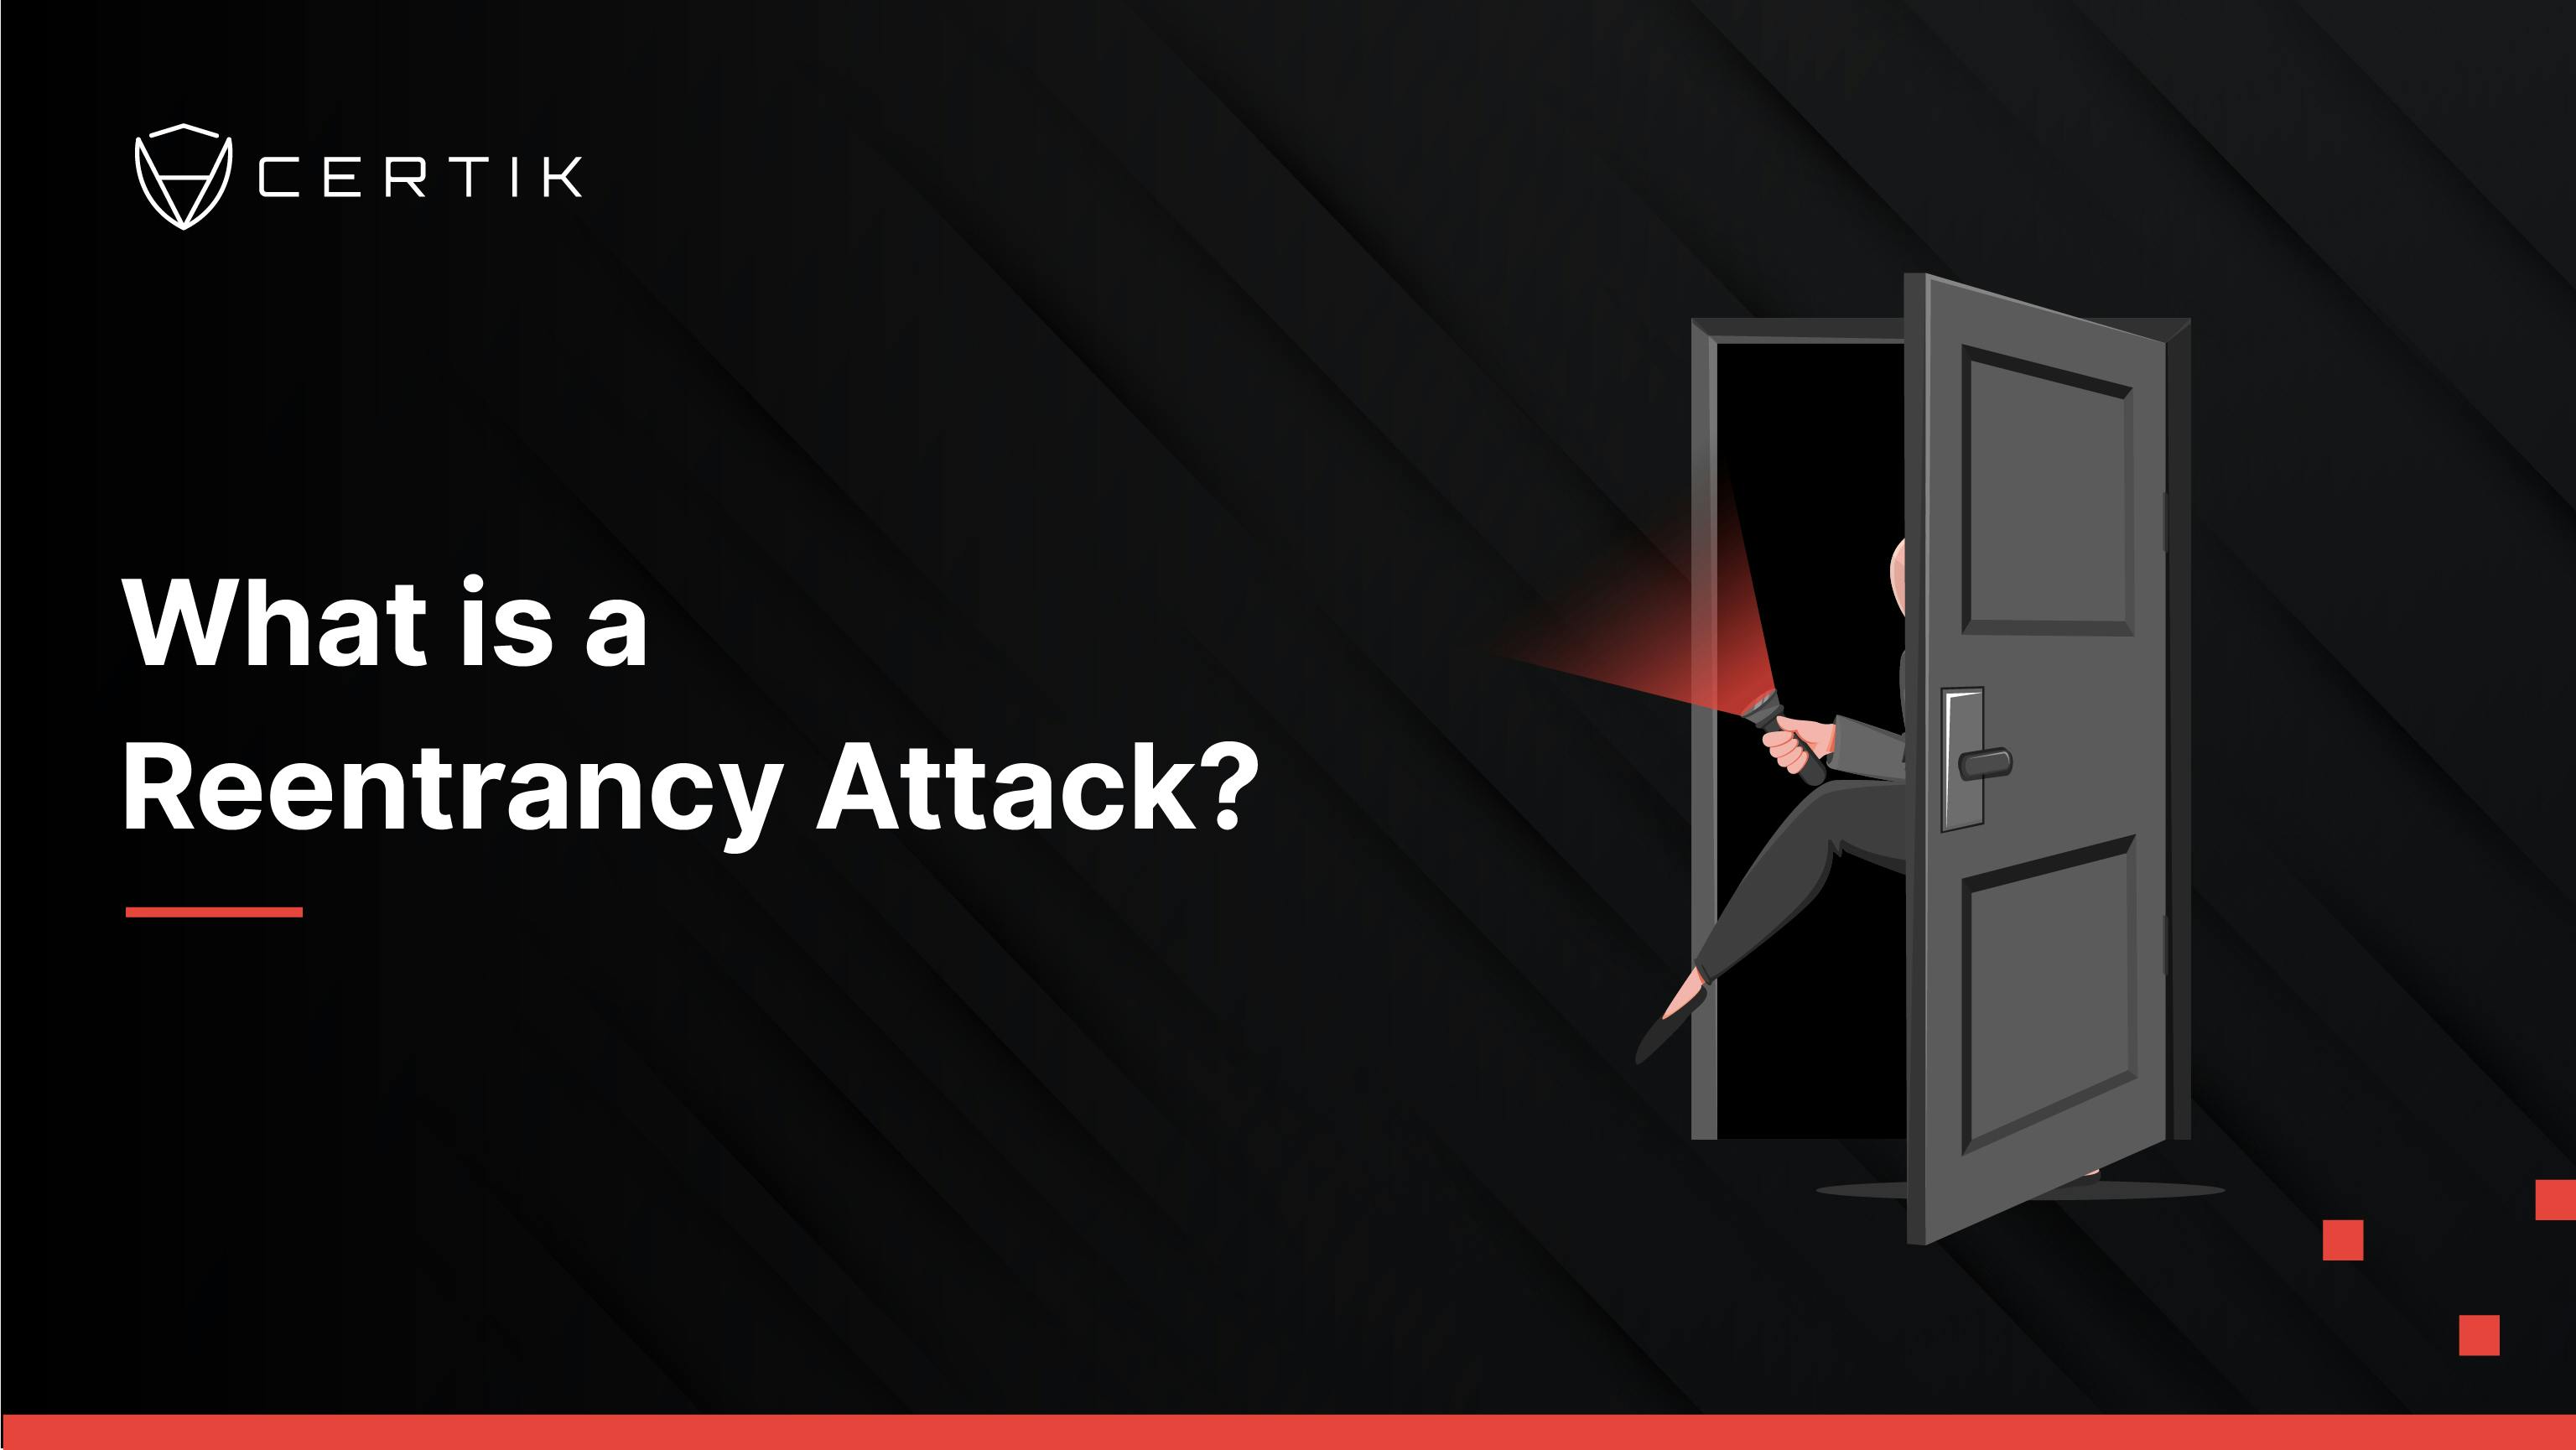 What is a Reentrancy Attack?